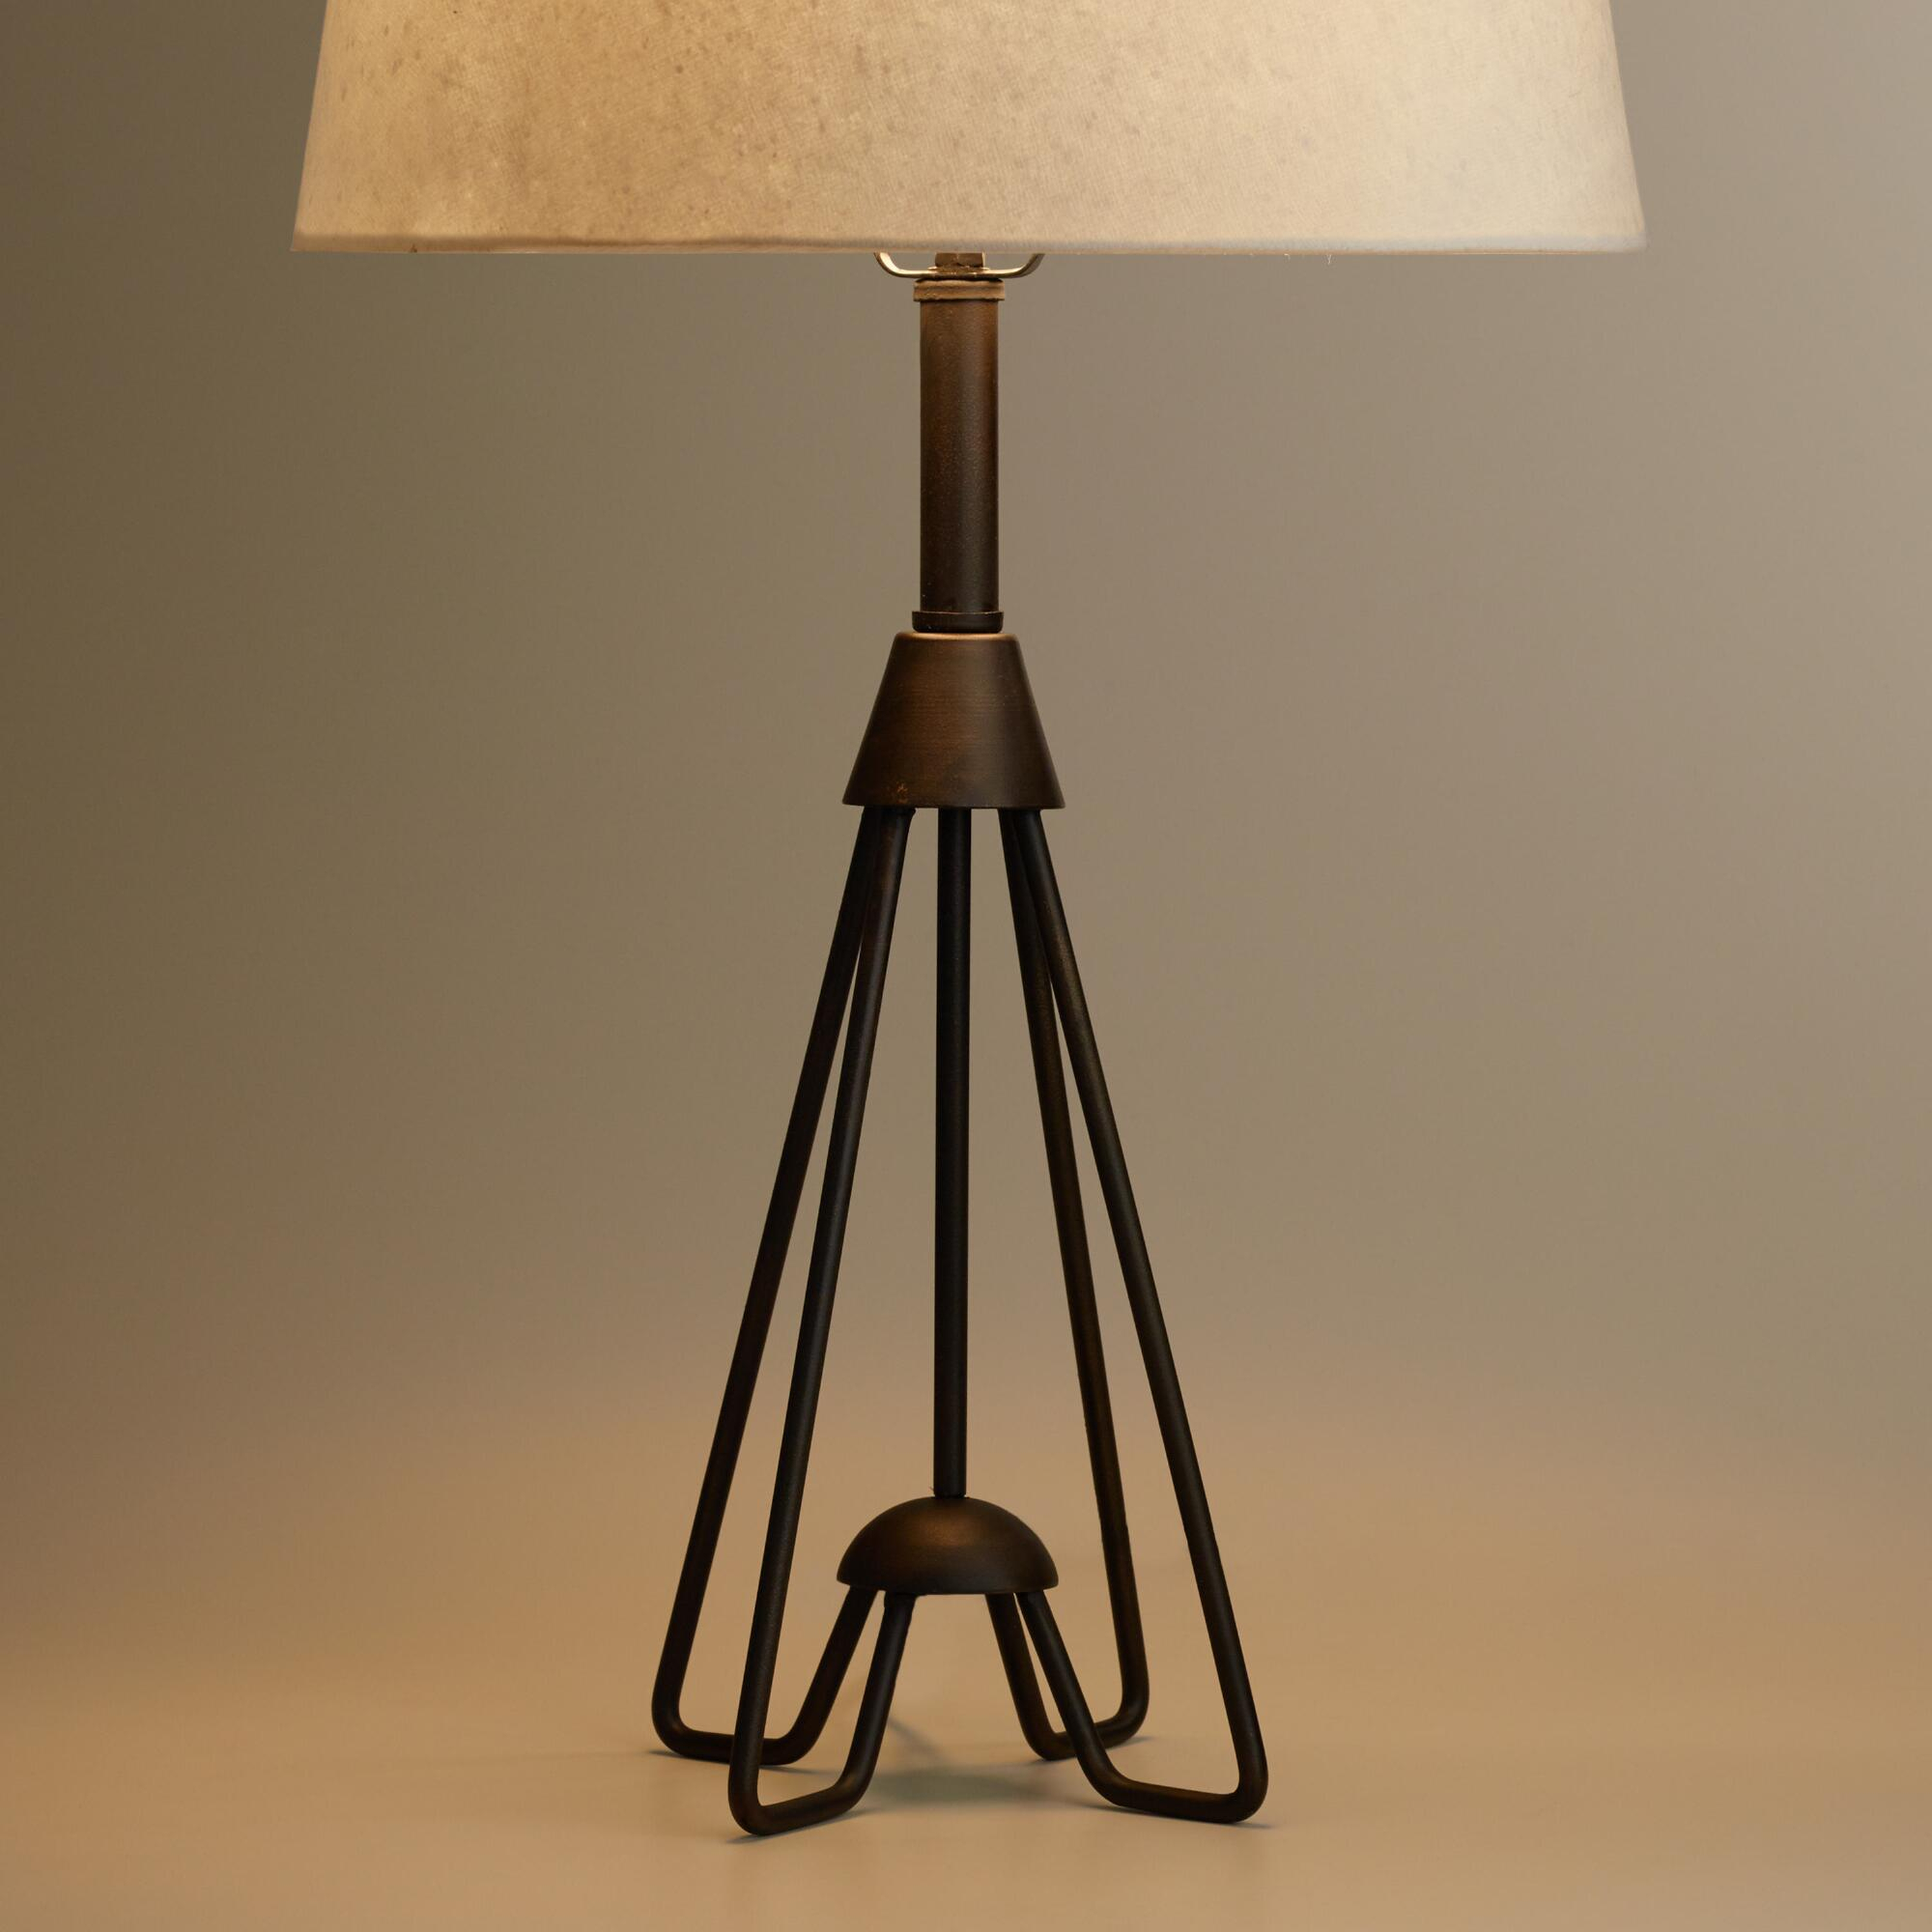 Lamp Iron Hairpin Kent Table Lamp Base Hairpin Legs Mid Century intended for size 2000 X 2000